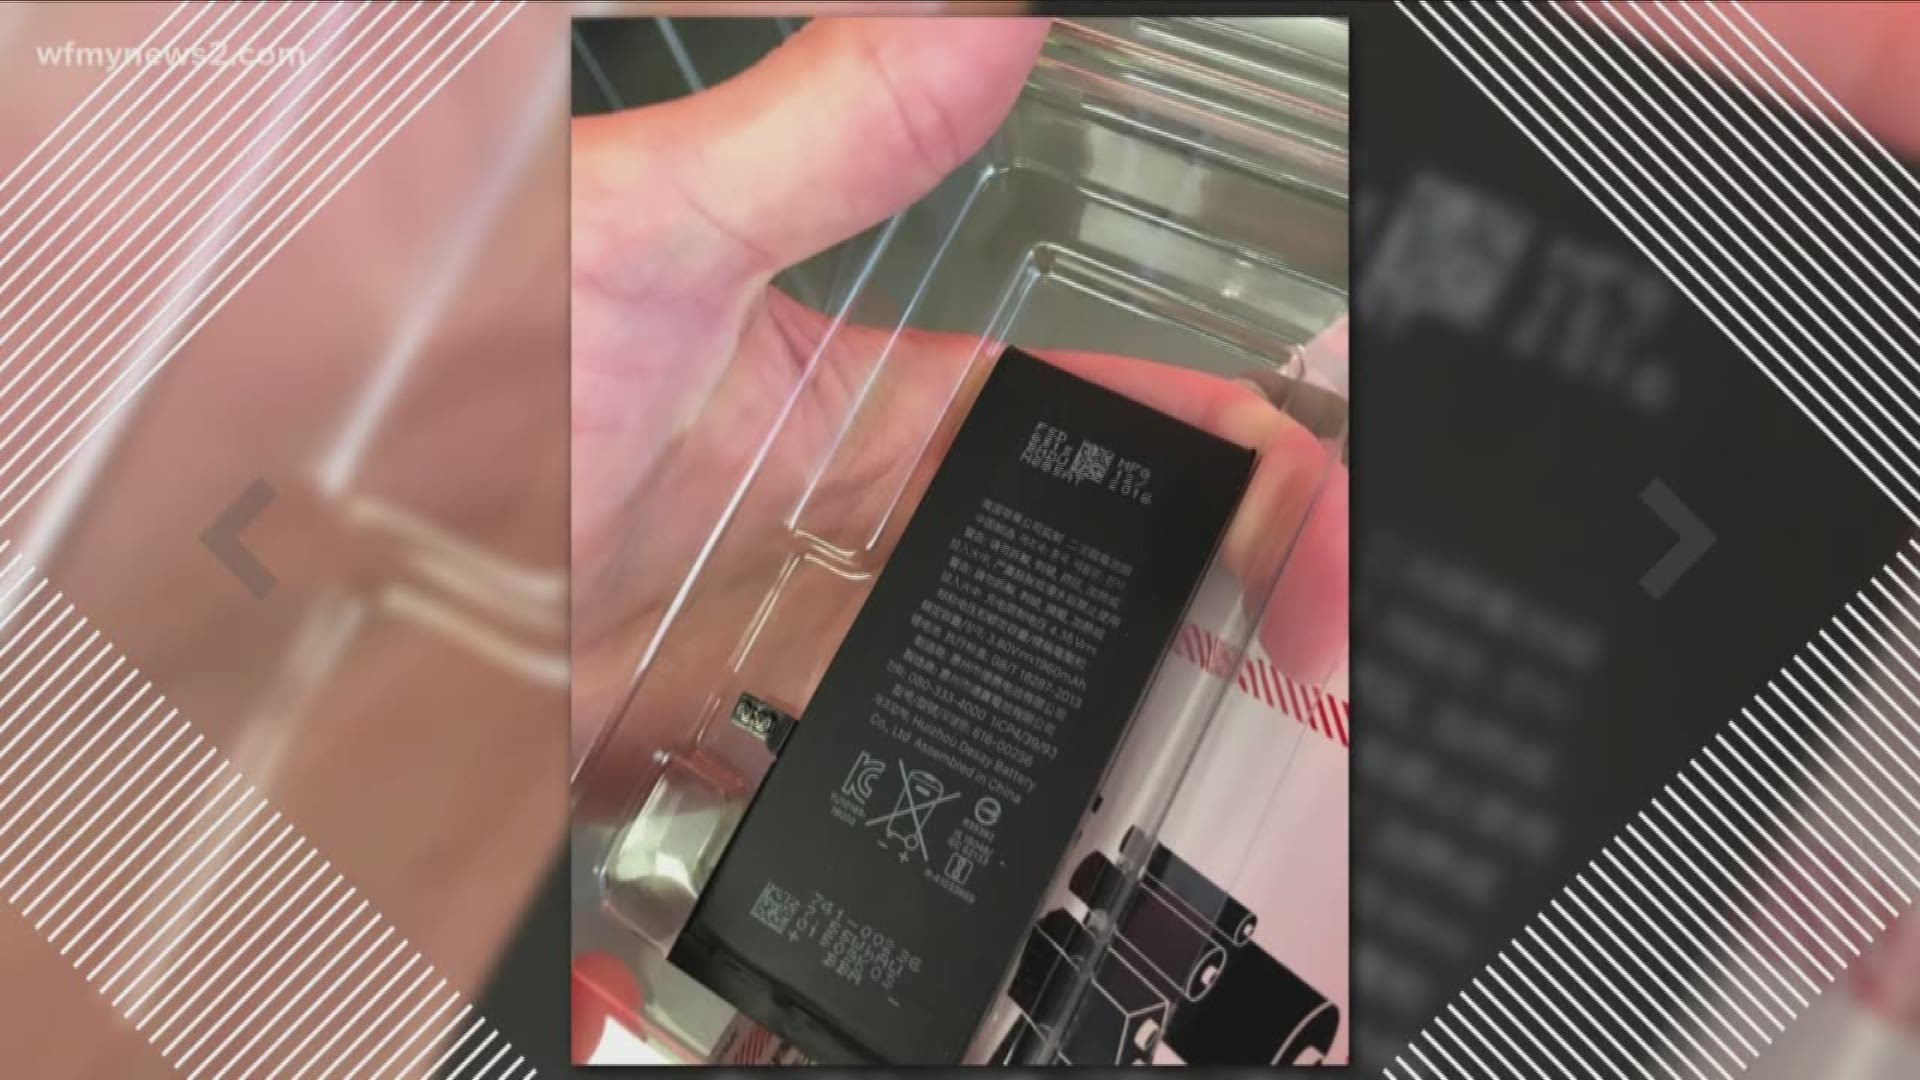 The deadline to get your iPhone battery replaced is almost here. Here's why you should do it.